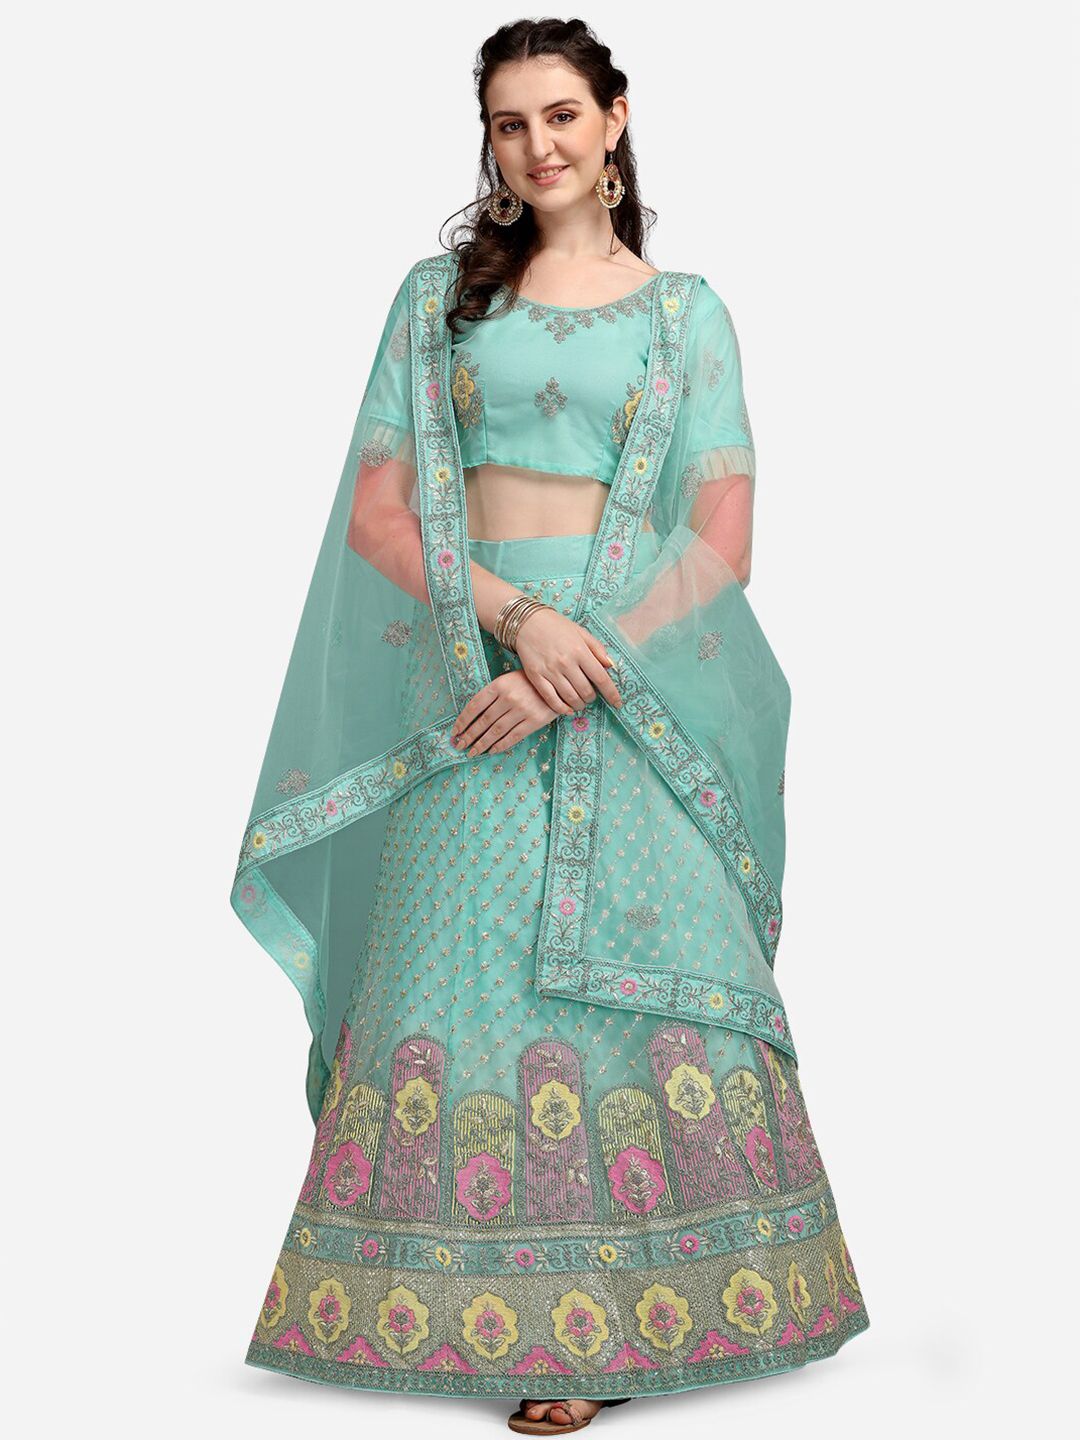 V SALES Blue Embroidered Sequinned Semi-Stitched Lehenga Choli With Dupatta Price in India